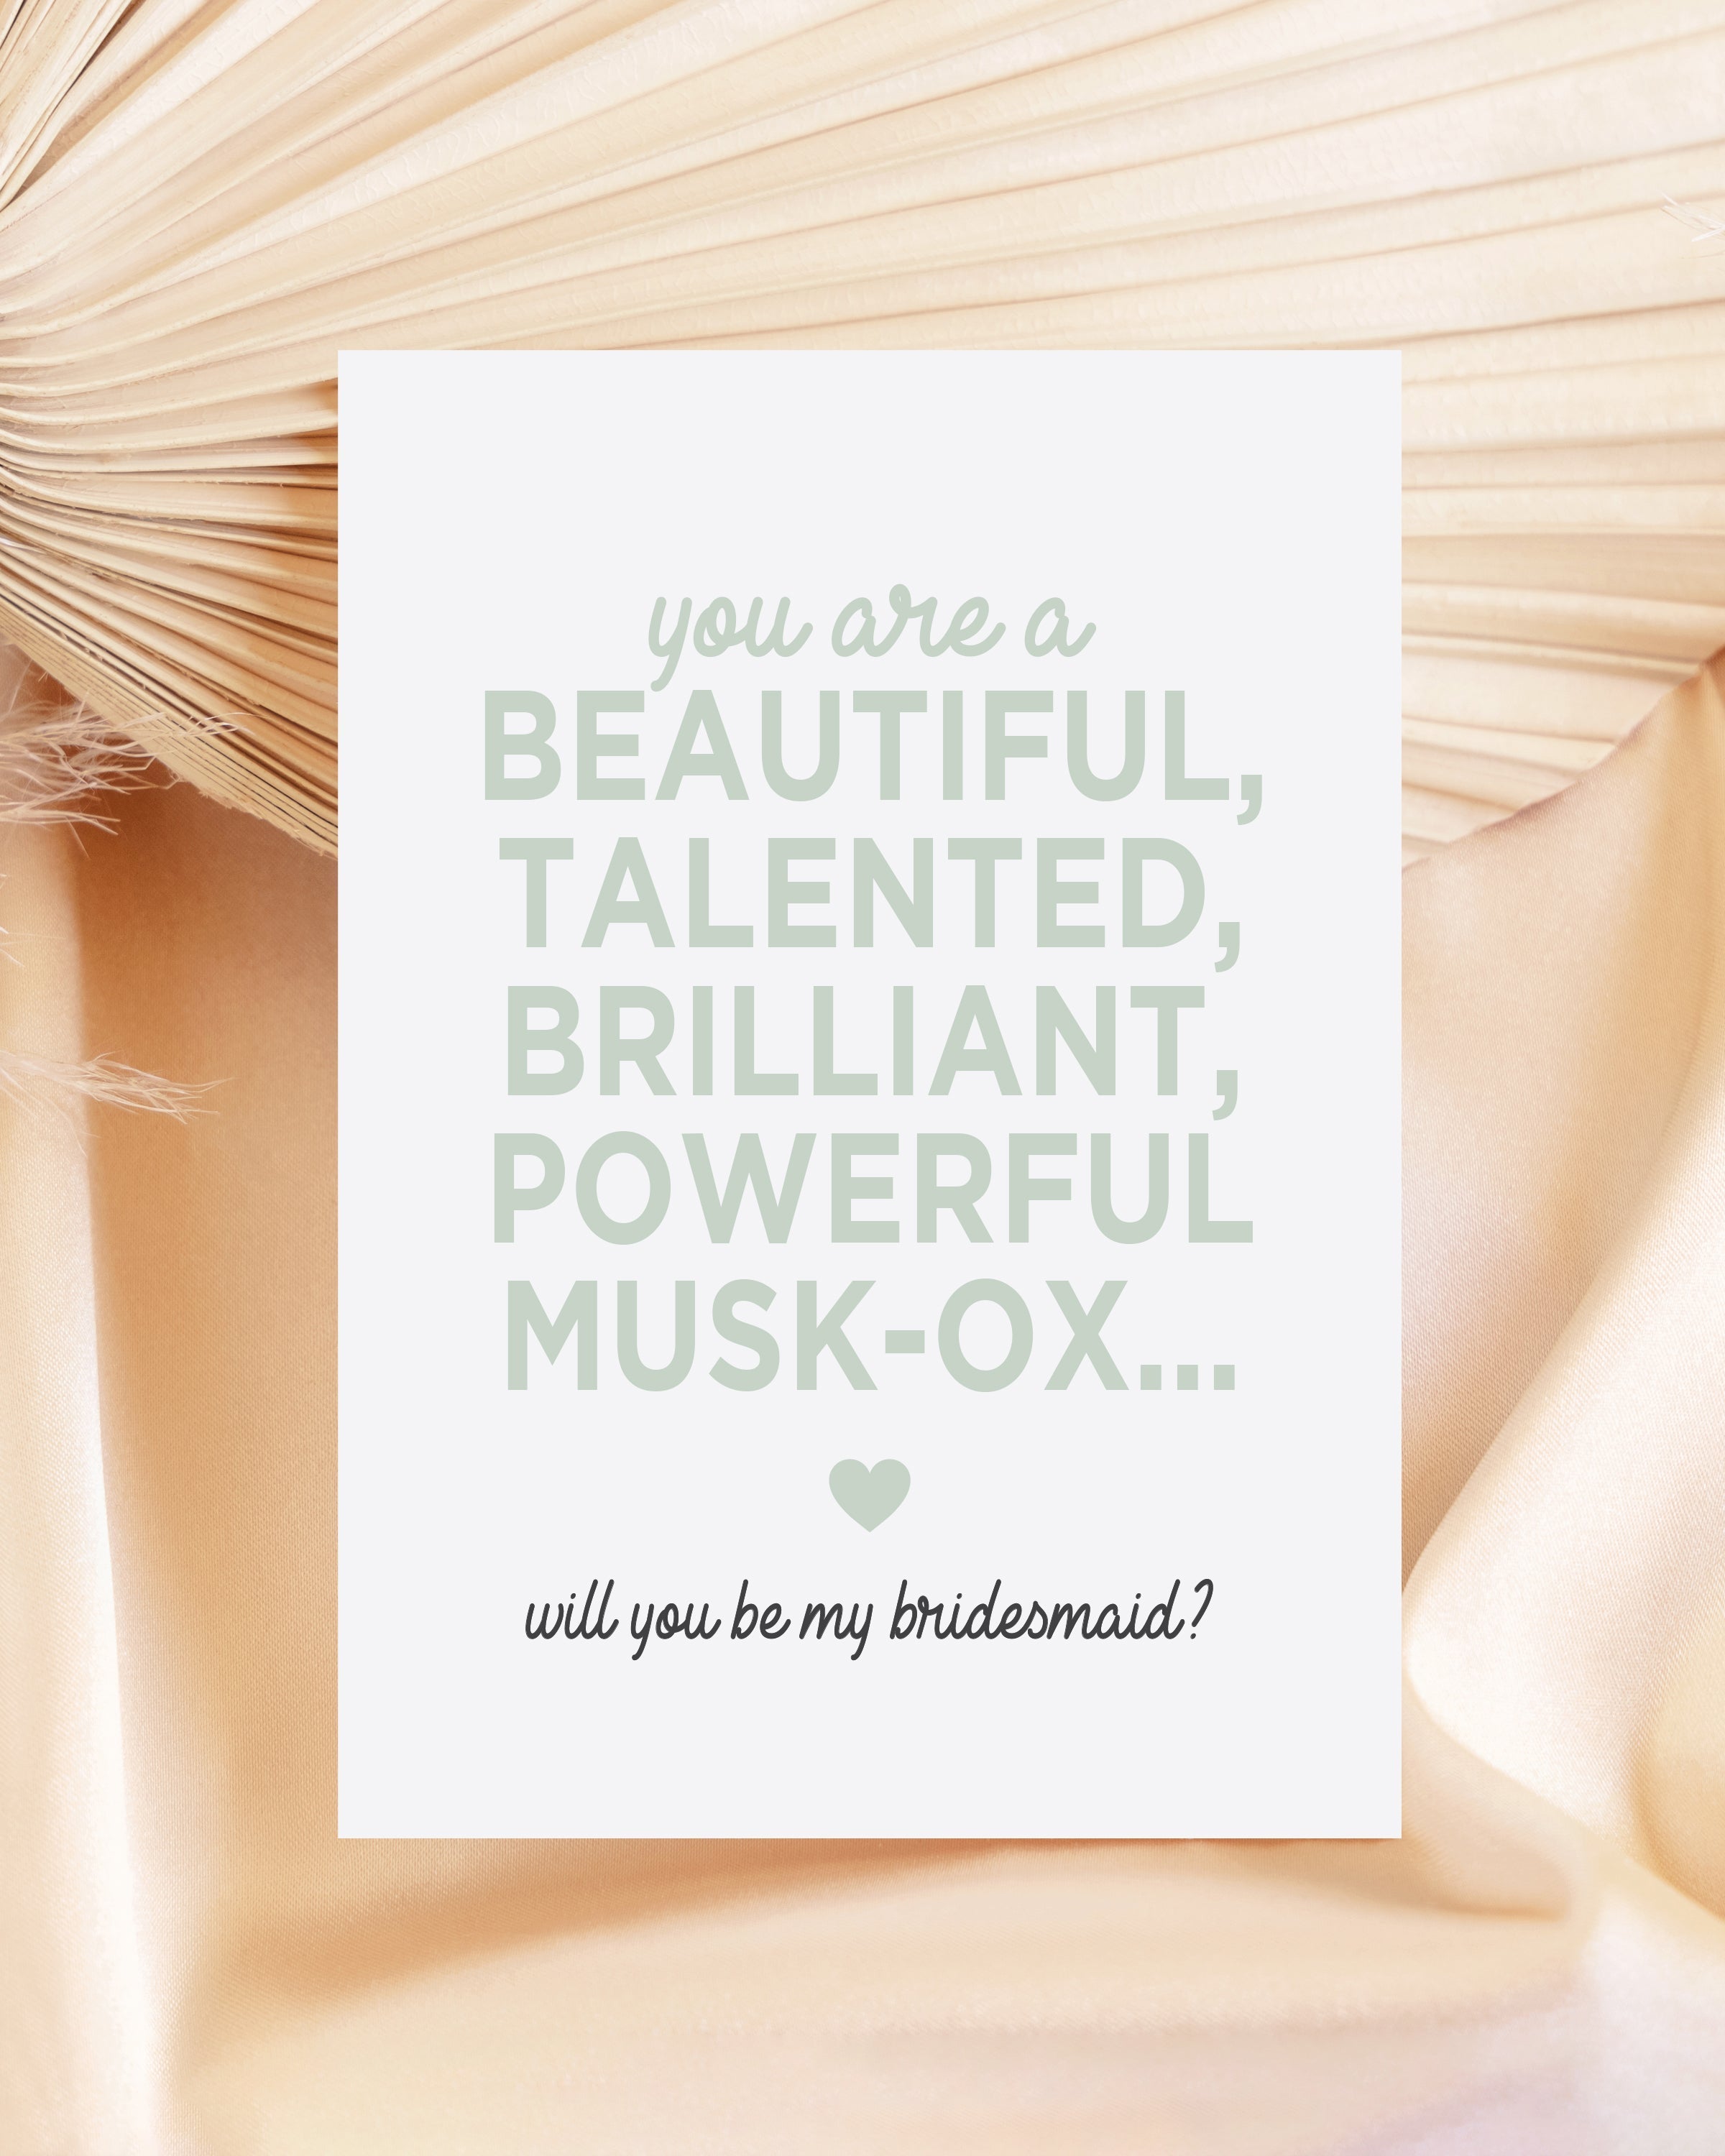 Musk-ox | Parks & Recreation Bridesmaid Proposal Card